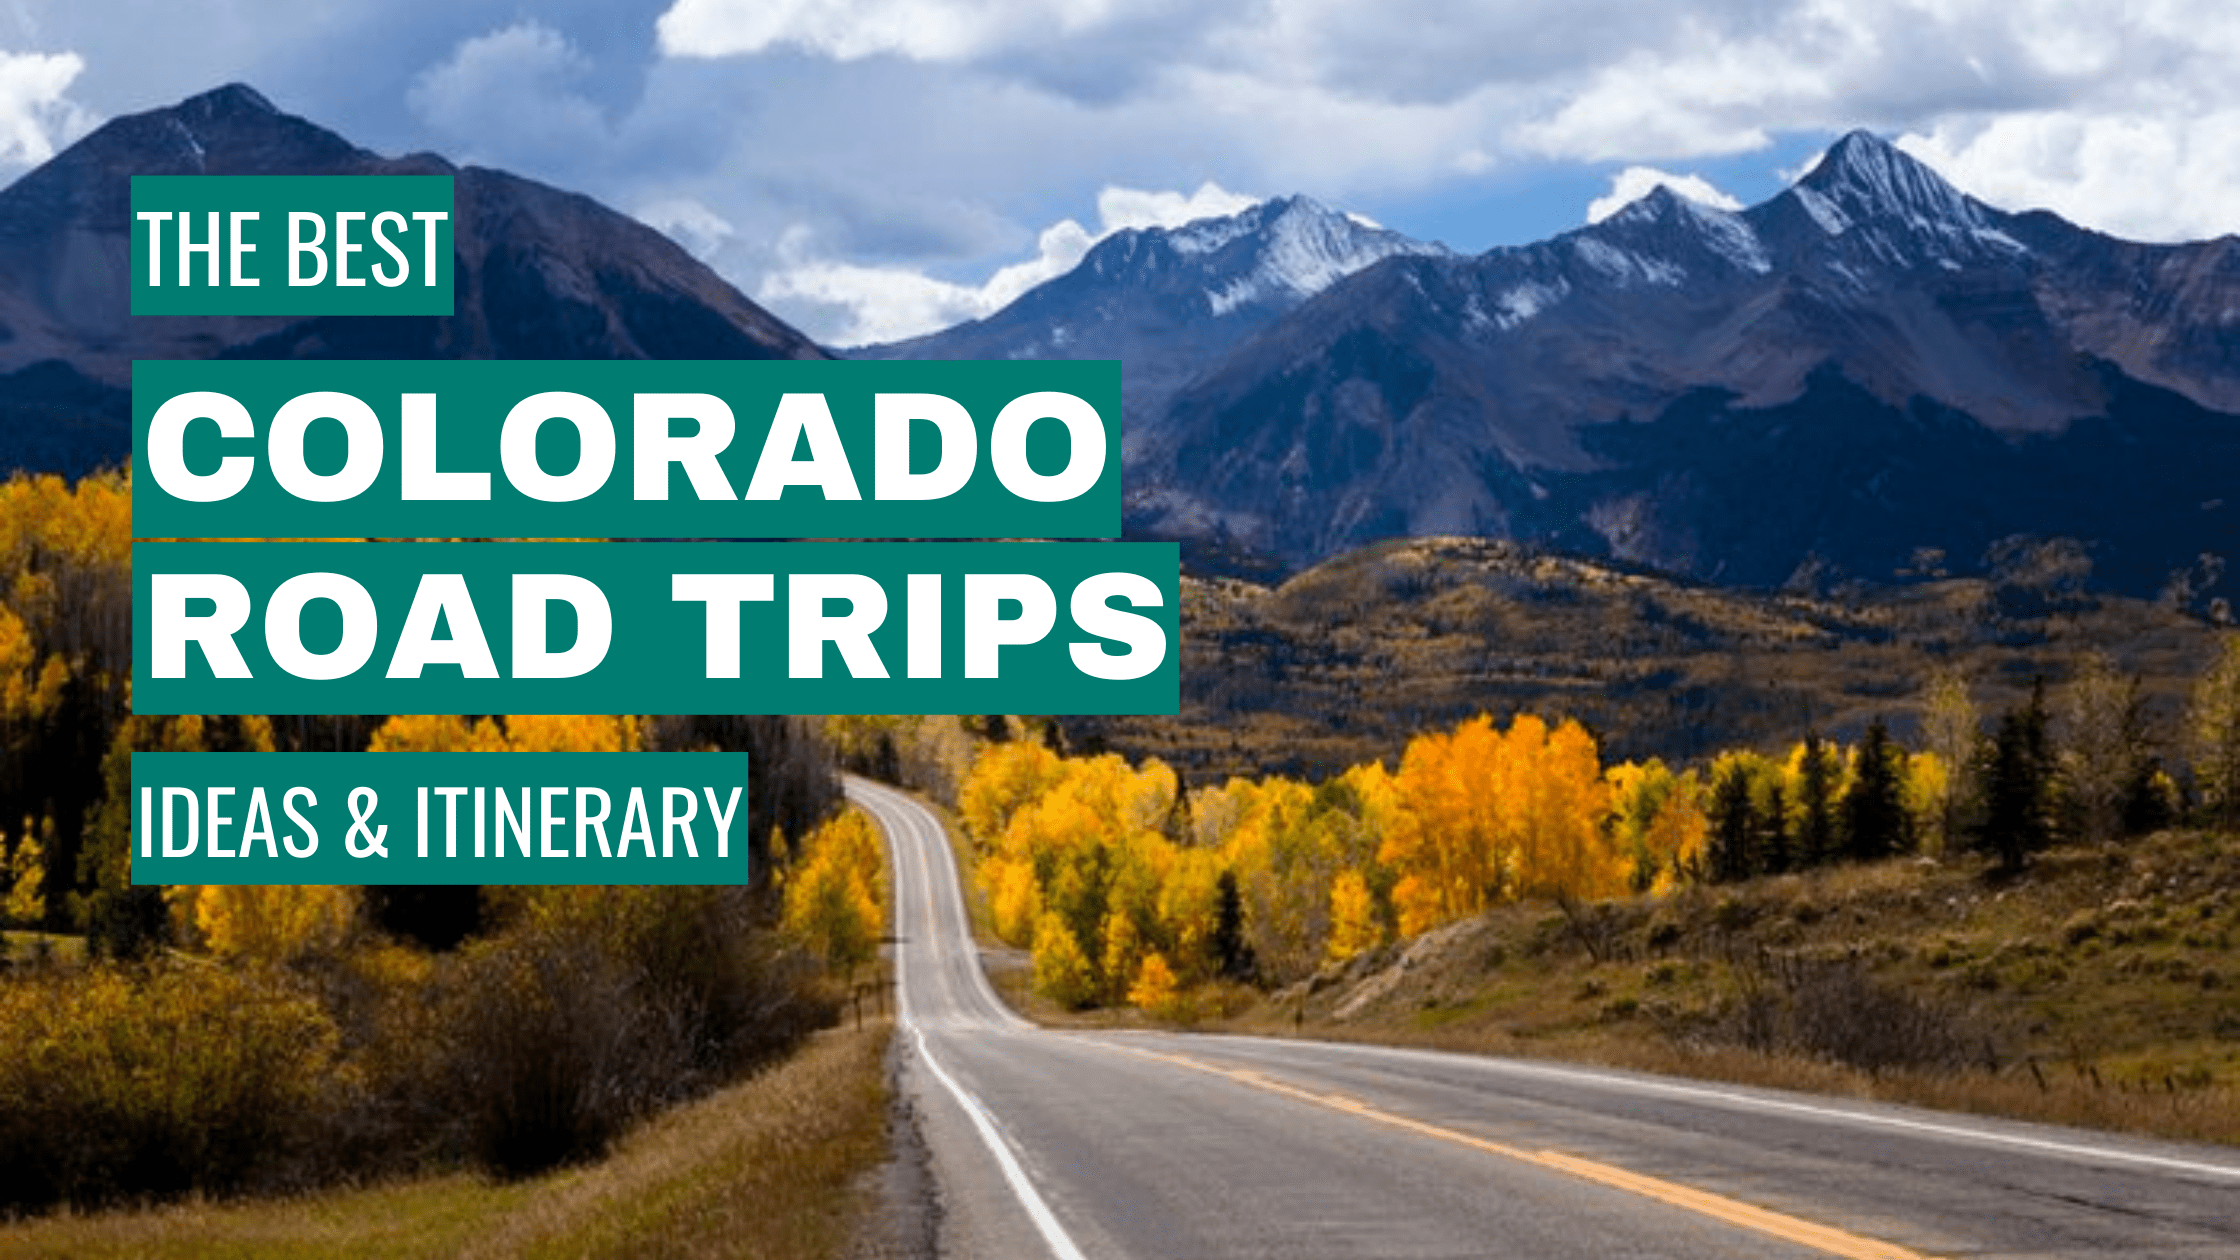 Colorado Road Trip Ideas: 11 Best Road Trips + Itinerary